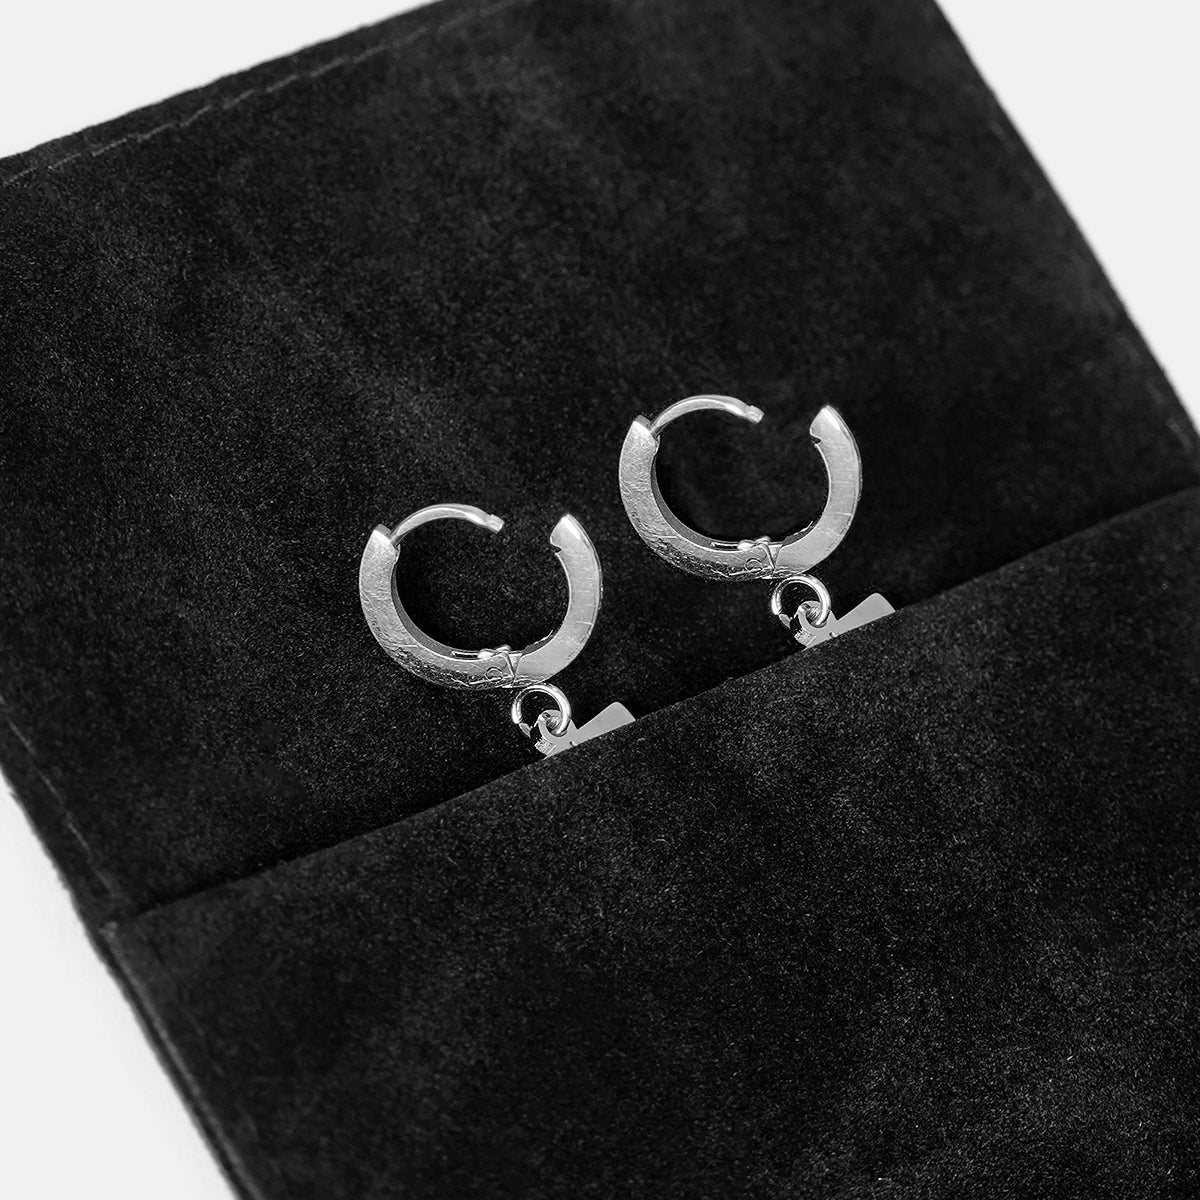 28 Number Earring - Stainless Steel